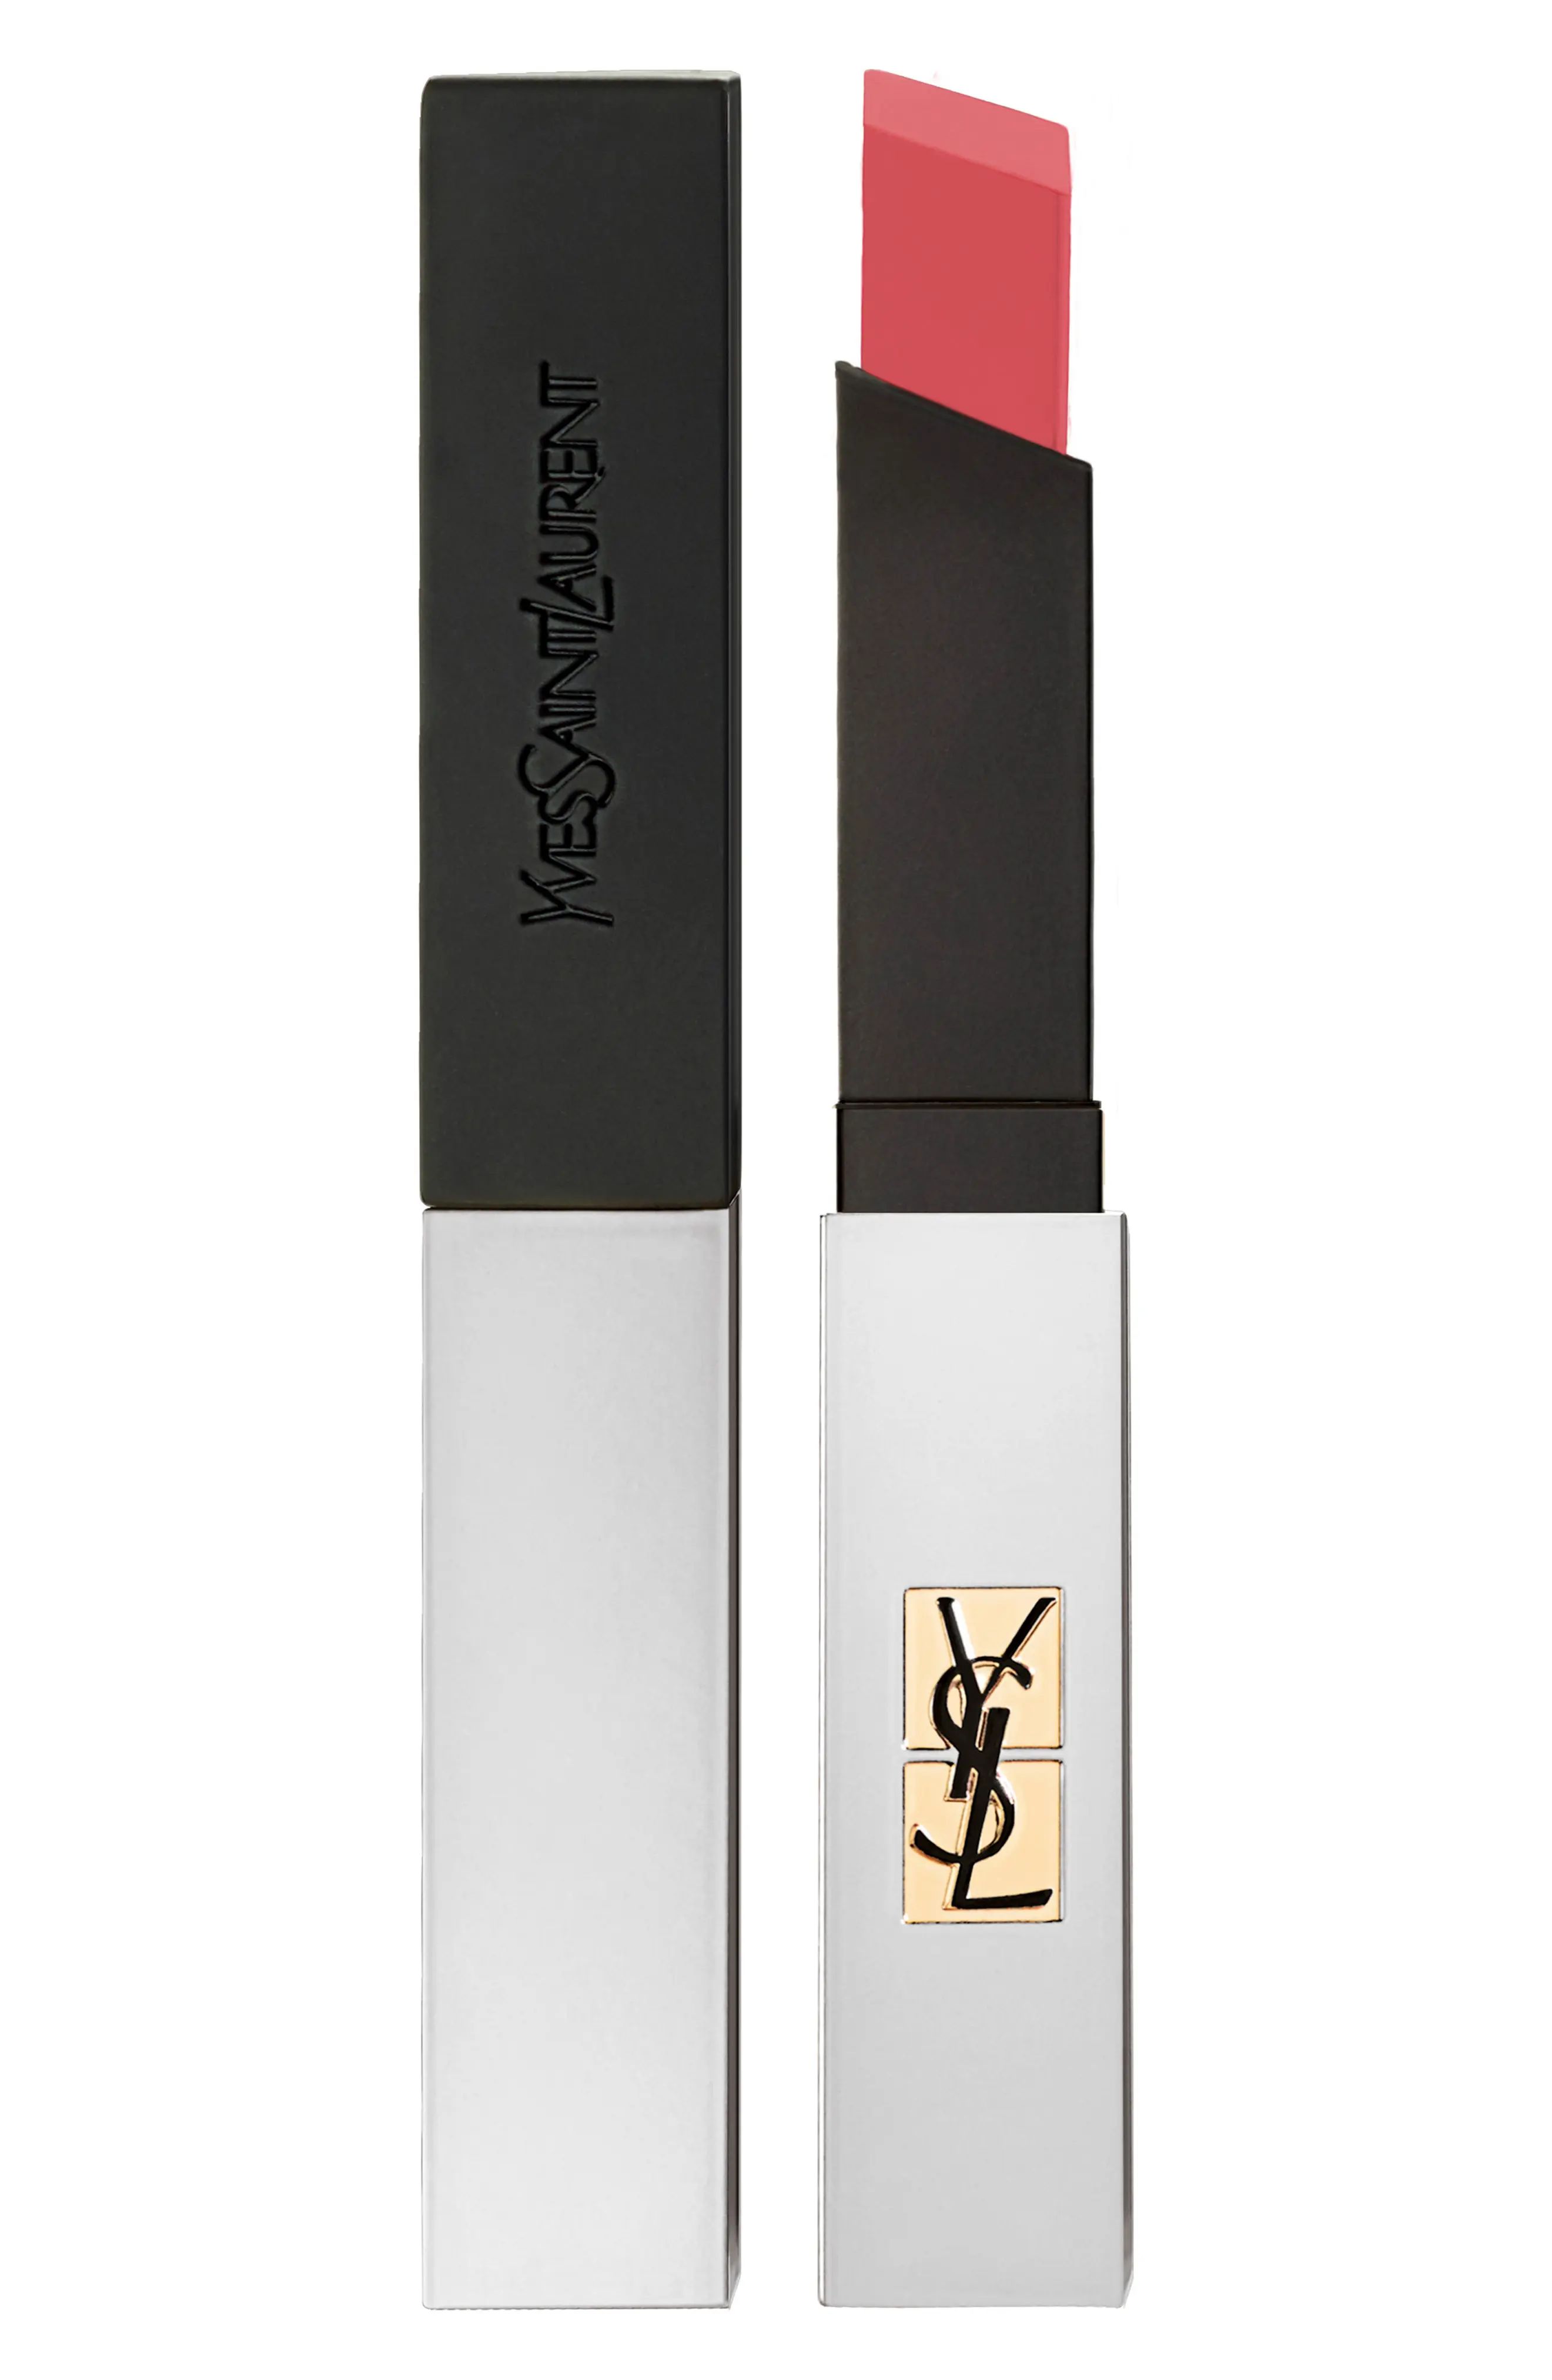 Yves Saint Laurent Rouge Pur Couture The Slim Sheer Matte Lipstick in 112 Raw Rosewood at Nordstrom | Nordstrom